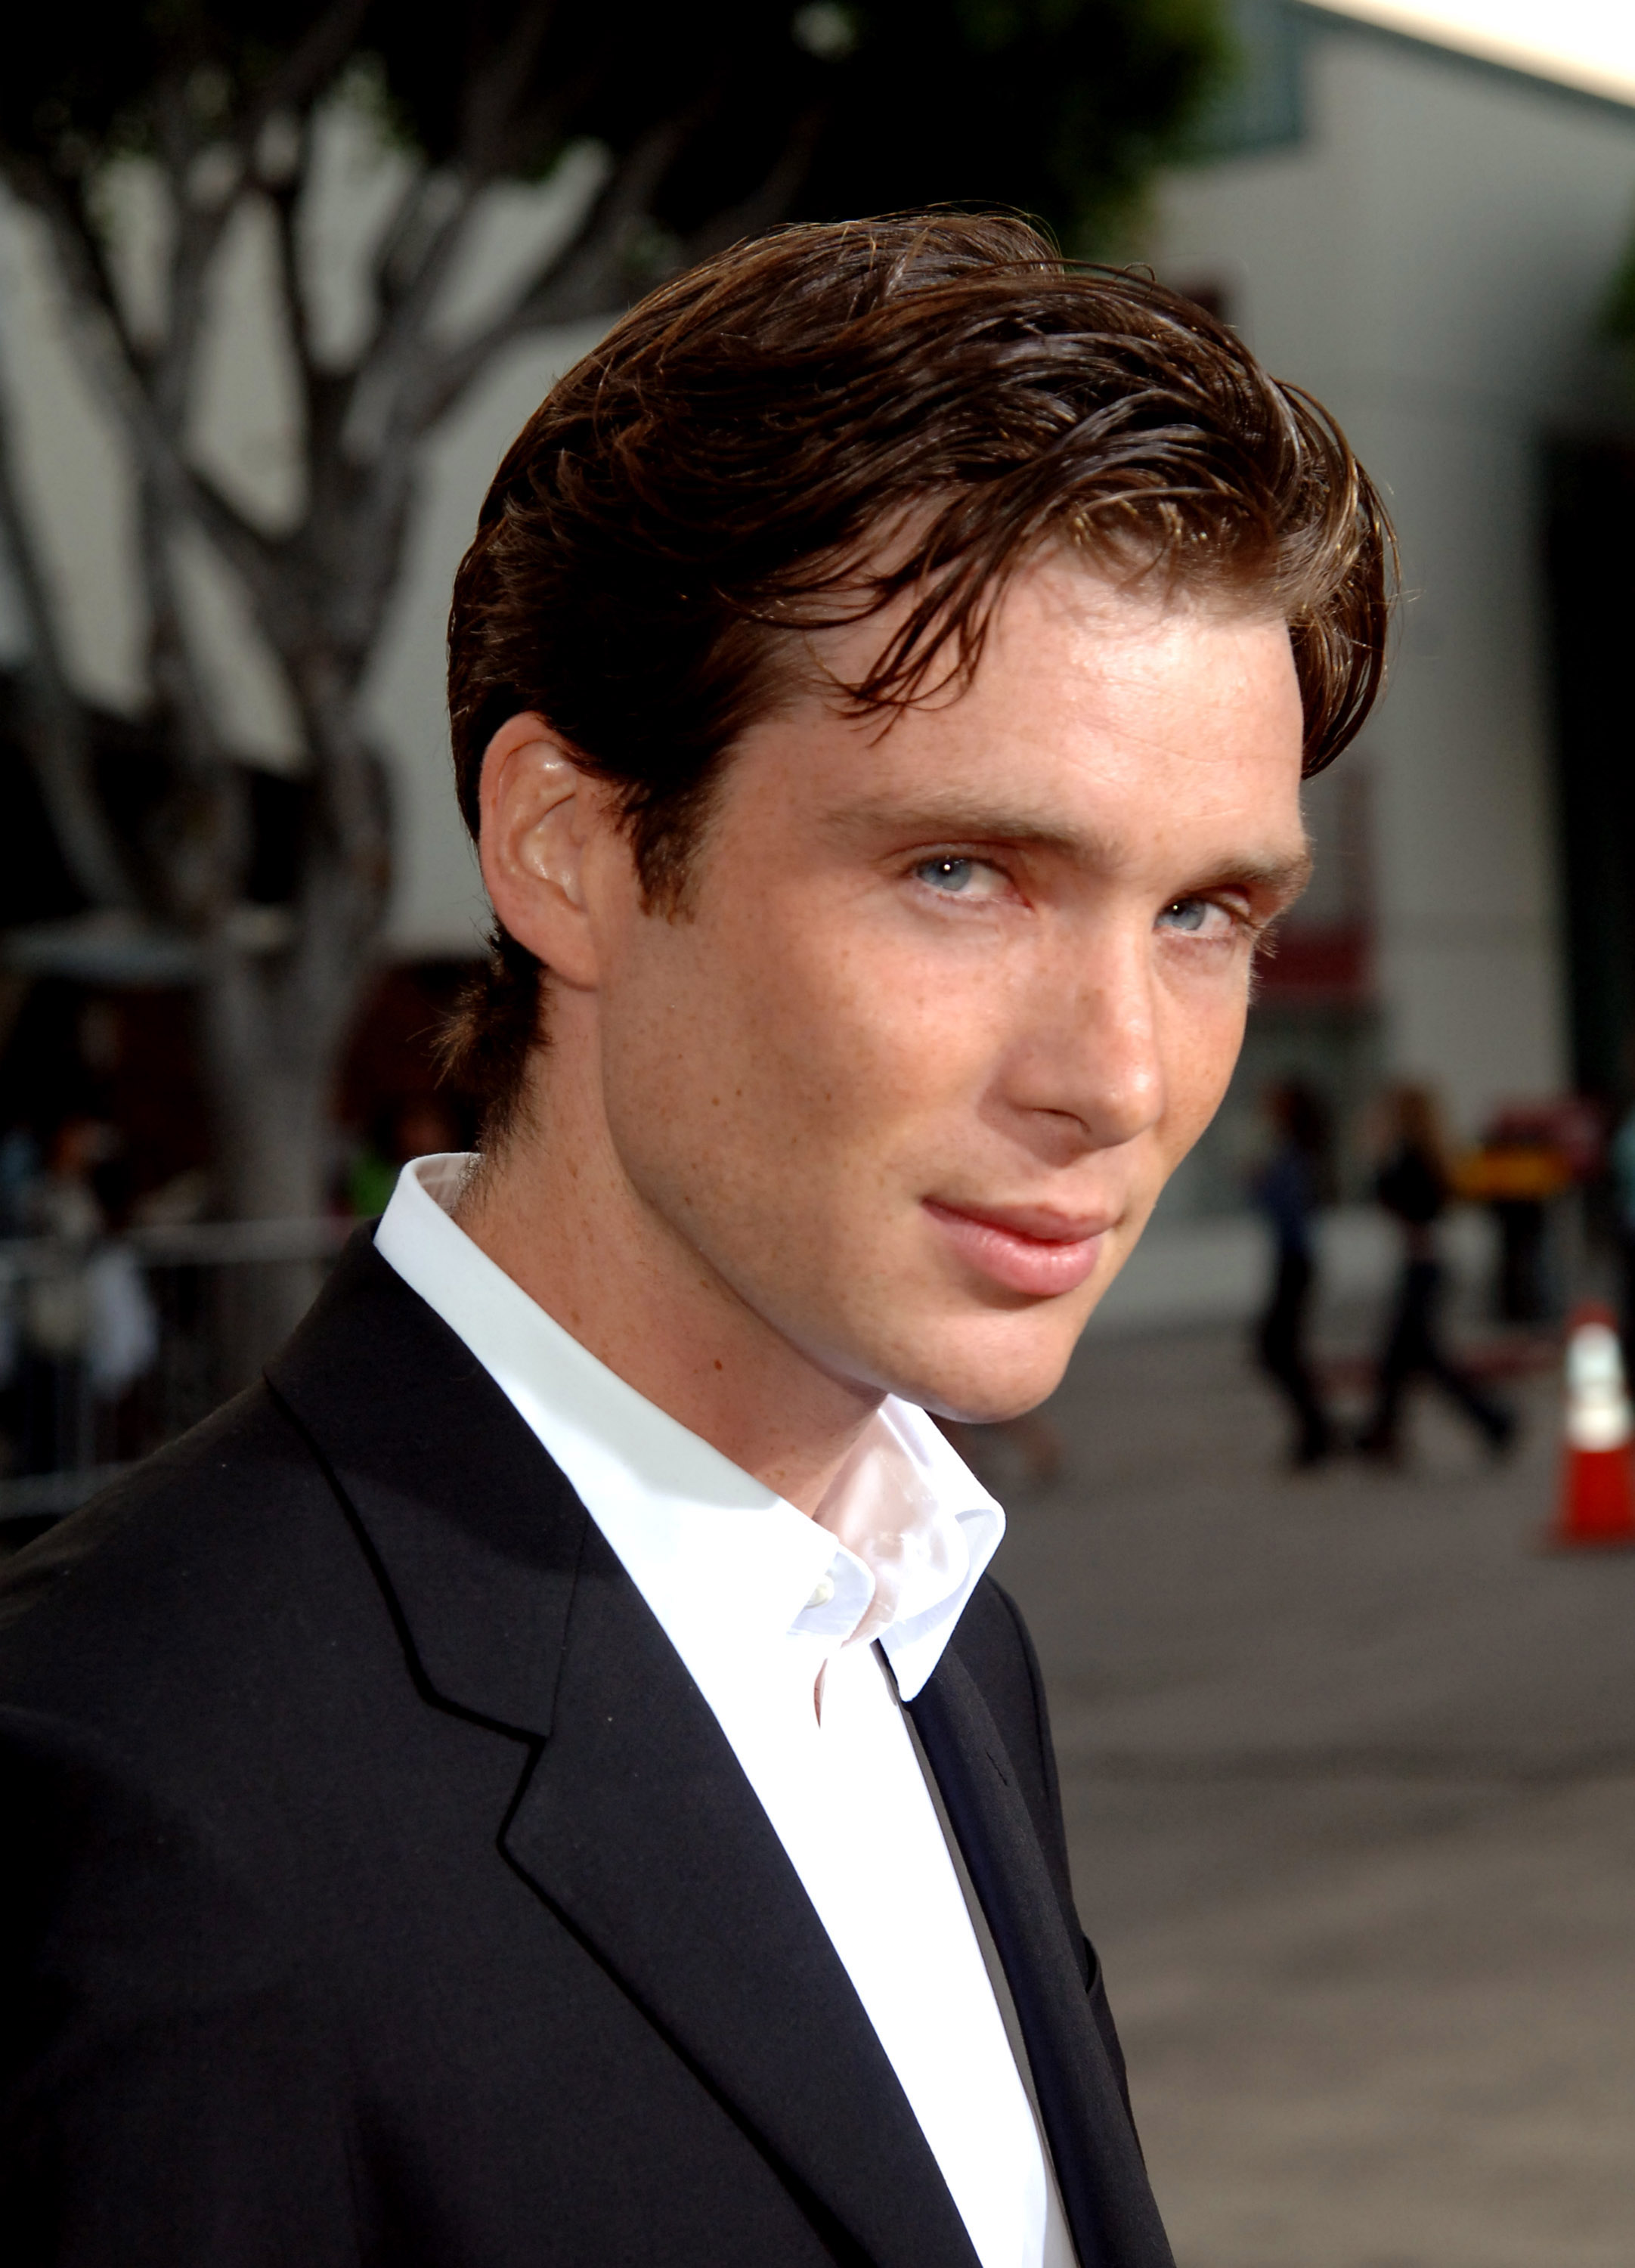 Cillian Murphy attends the "Red Eye" Los Angeles premiere on August 4, 2005 in Westwood, California | Source: Getty Images